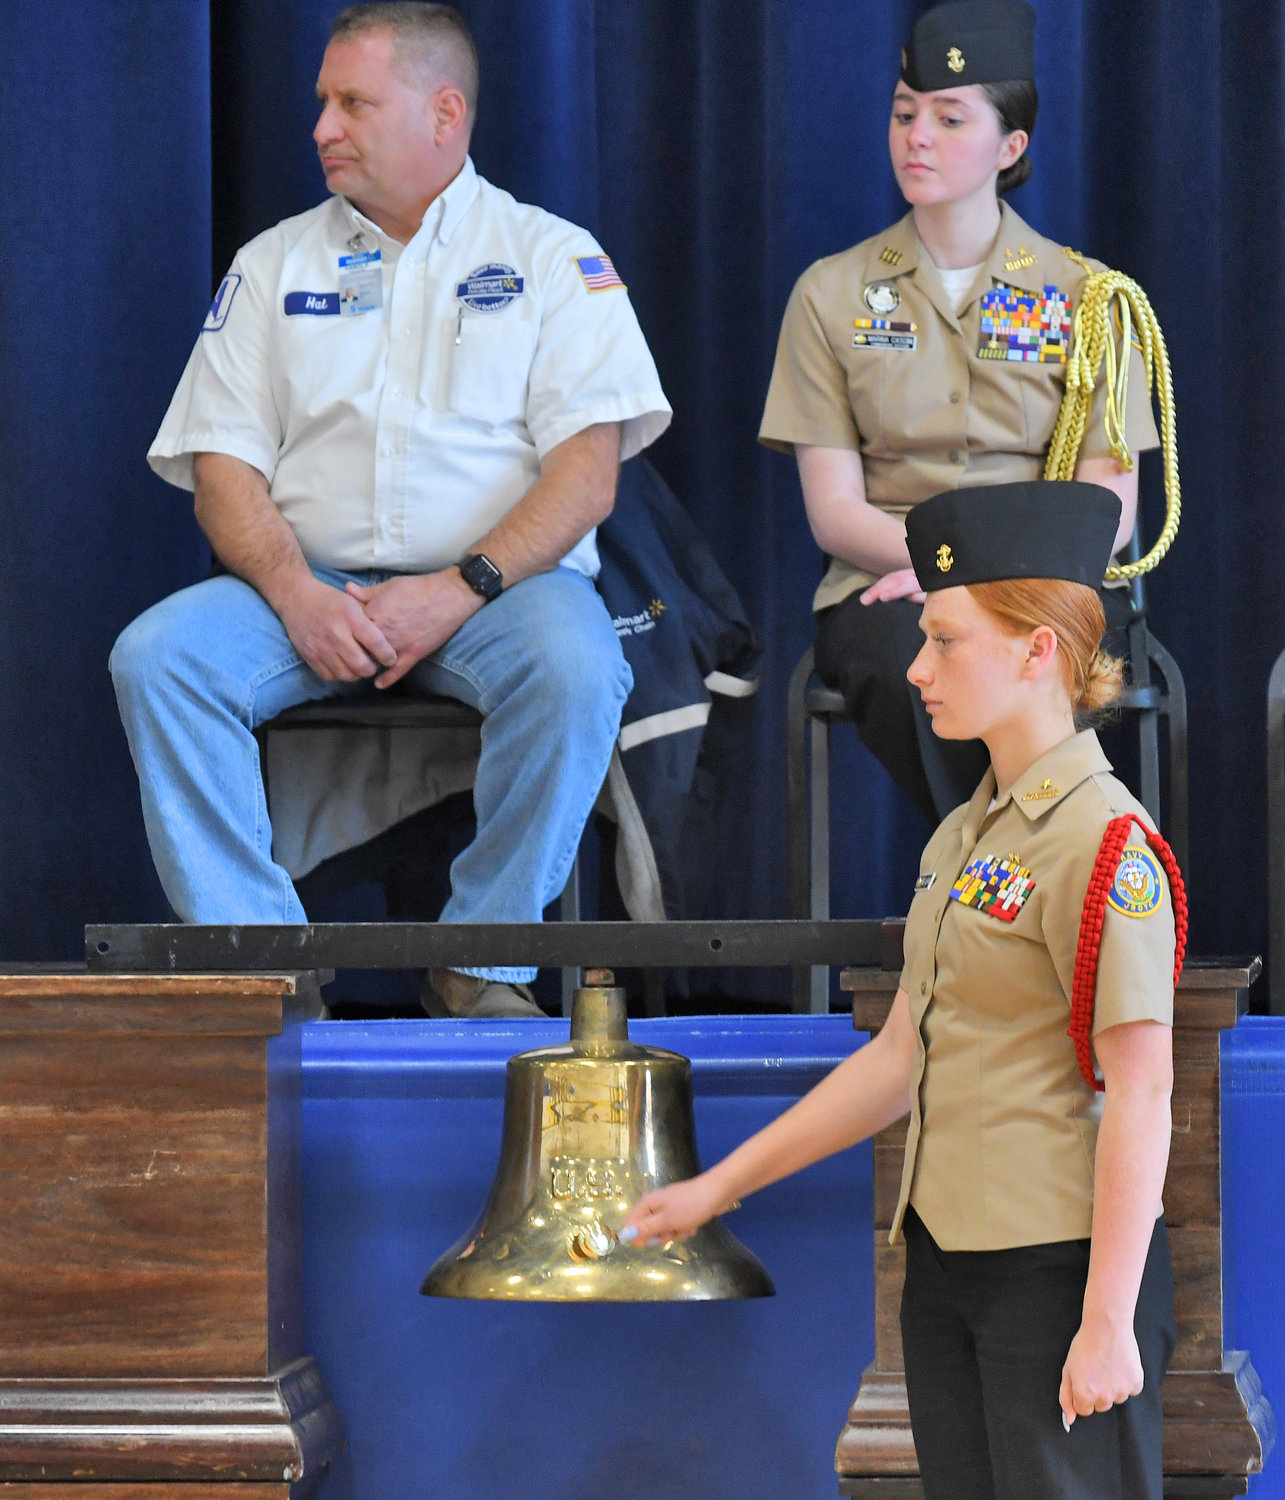 Notre Dame Navy Junior ROTC Cadet Paige Trevisani rings the bell Monday, Dec. 12 during the Wreaths Across America ceremony at the high school. In the background is Walmart truck driver and veteran Hal Coleatas, left, and NJROTC Commanding Officer Marina Cascini.